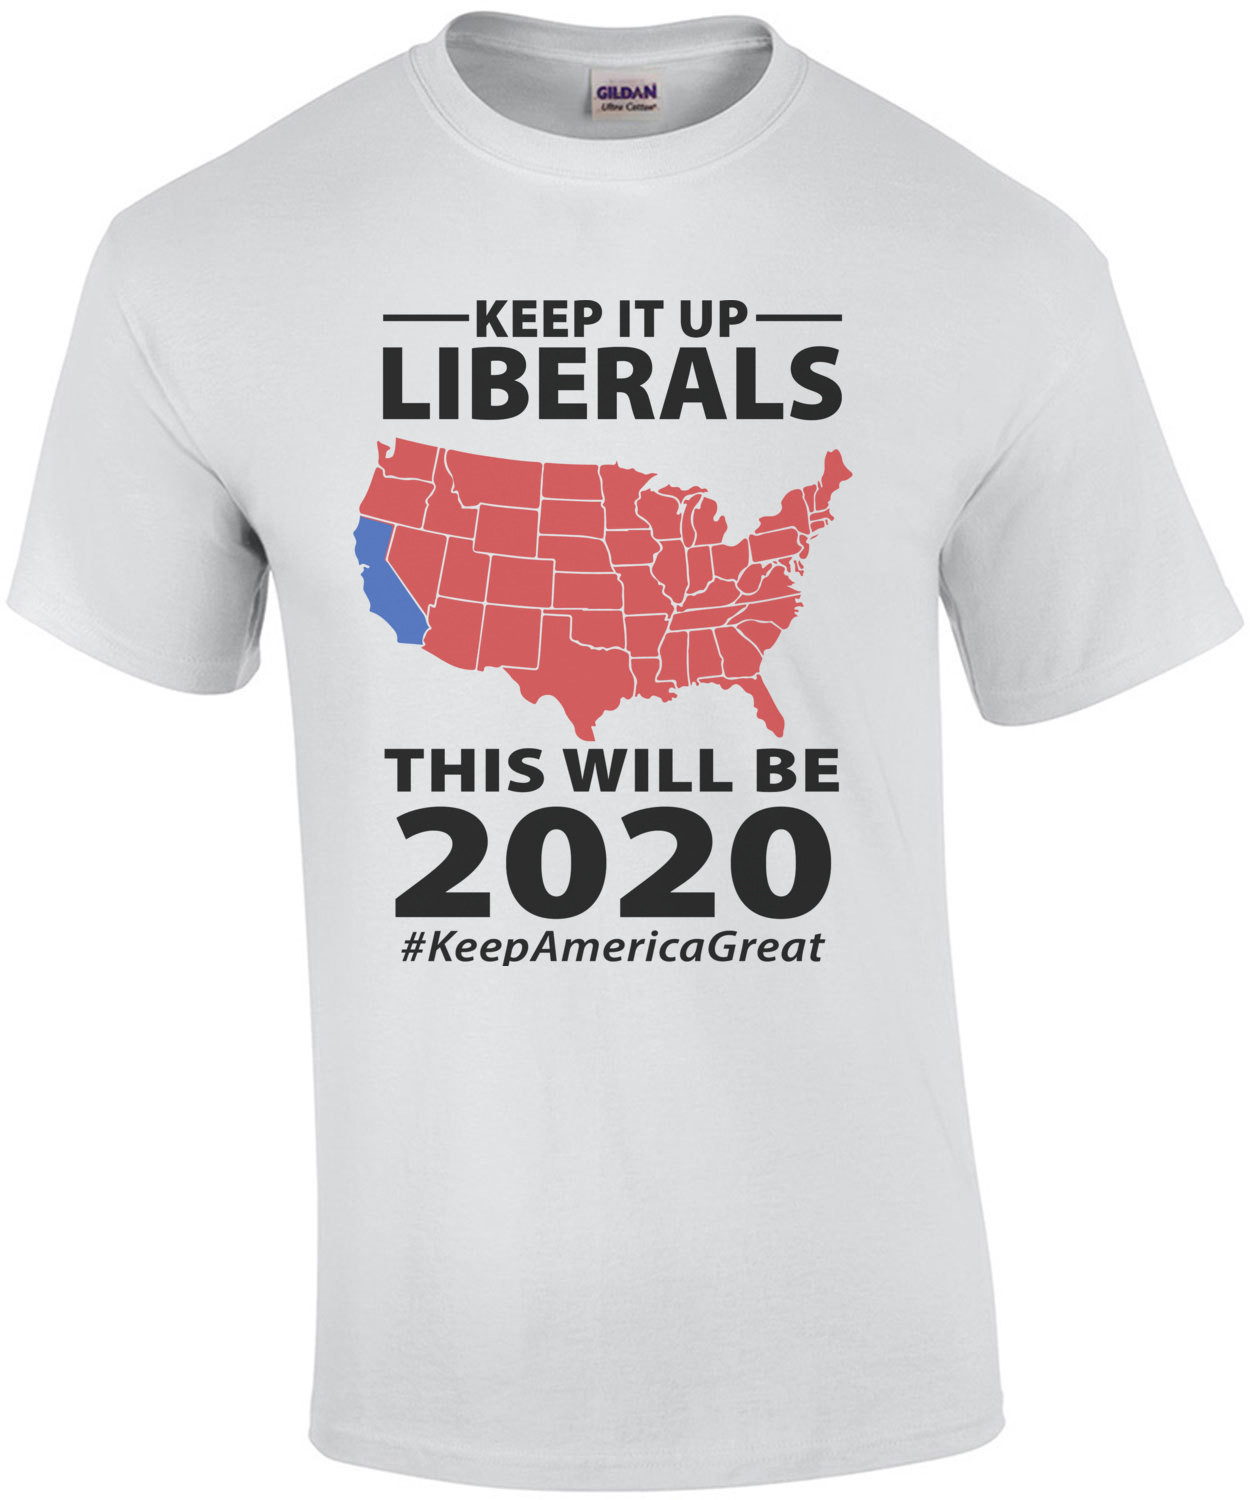 Keep it up liberals - this will be 2020 #KeepAmericaGreat - Pro Trump - Conservative T-Shirt